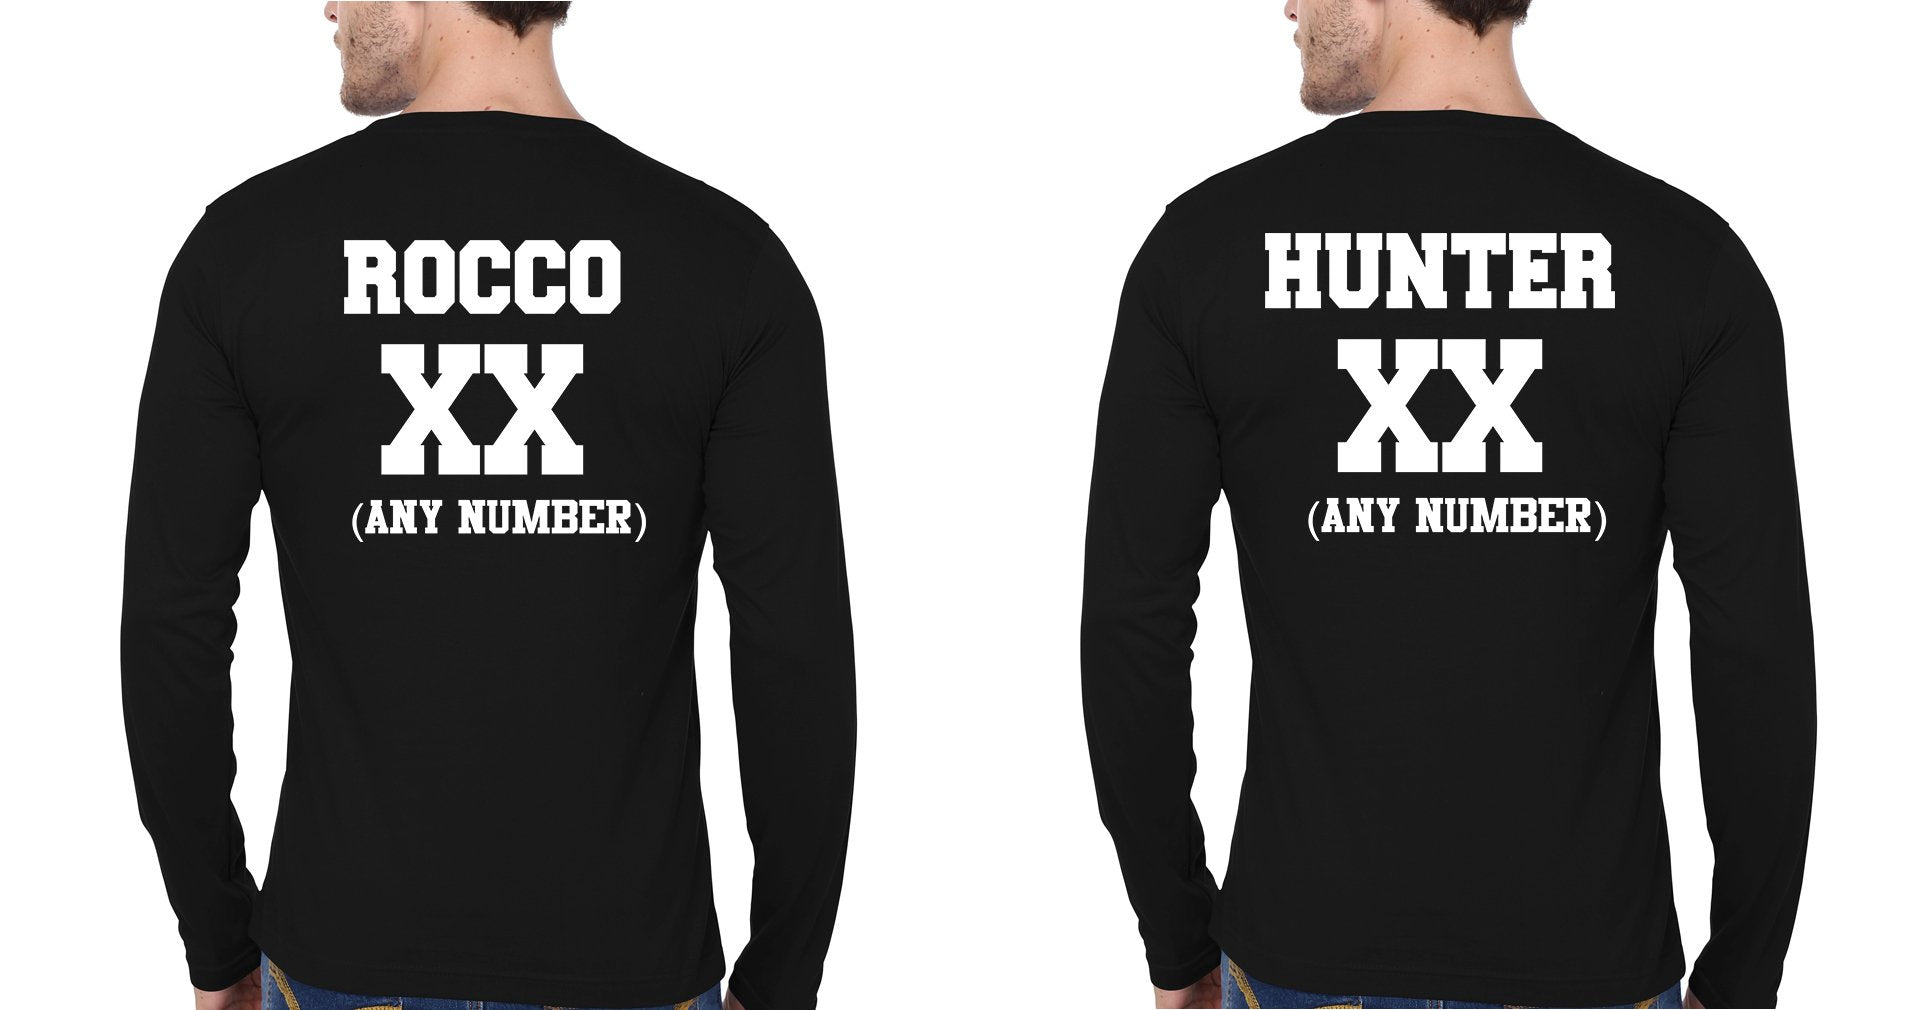 Rocco Hunter BFF Full Sleeves T-Shirts -FunkyTradition